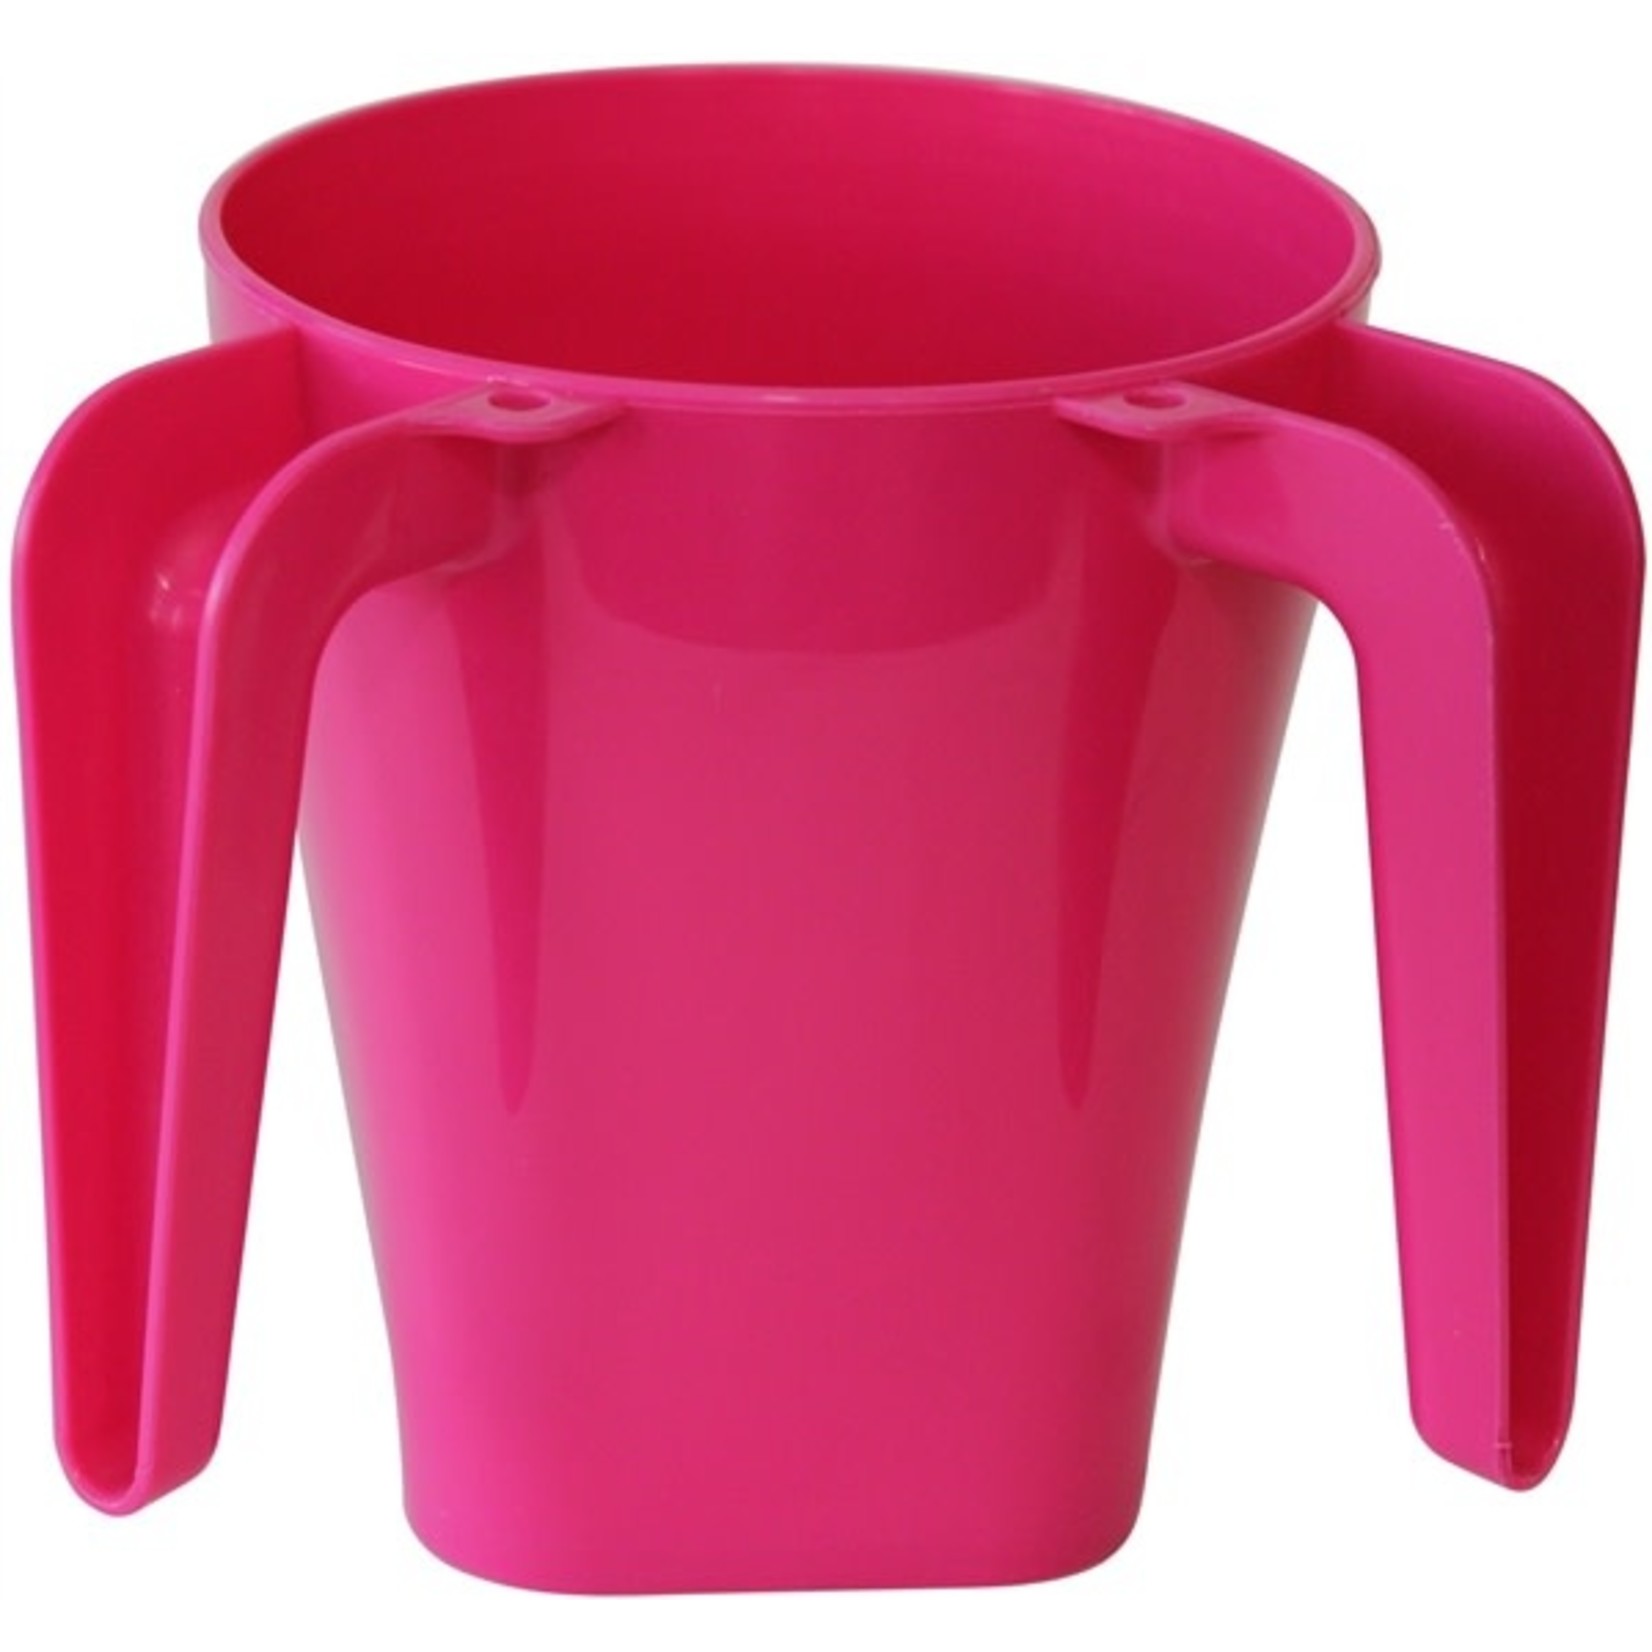 Plastic Washing Cup, Hot Pink